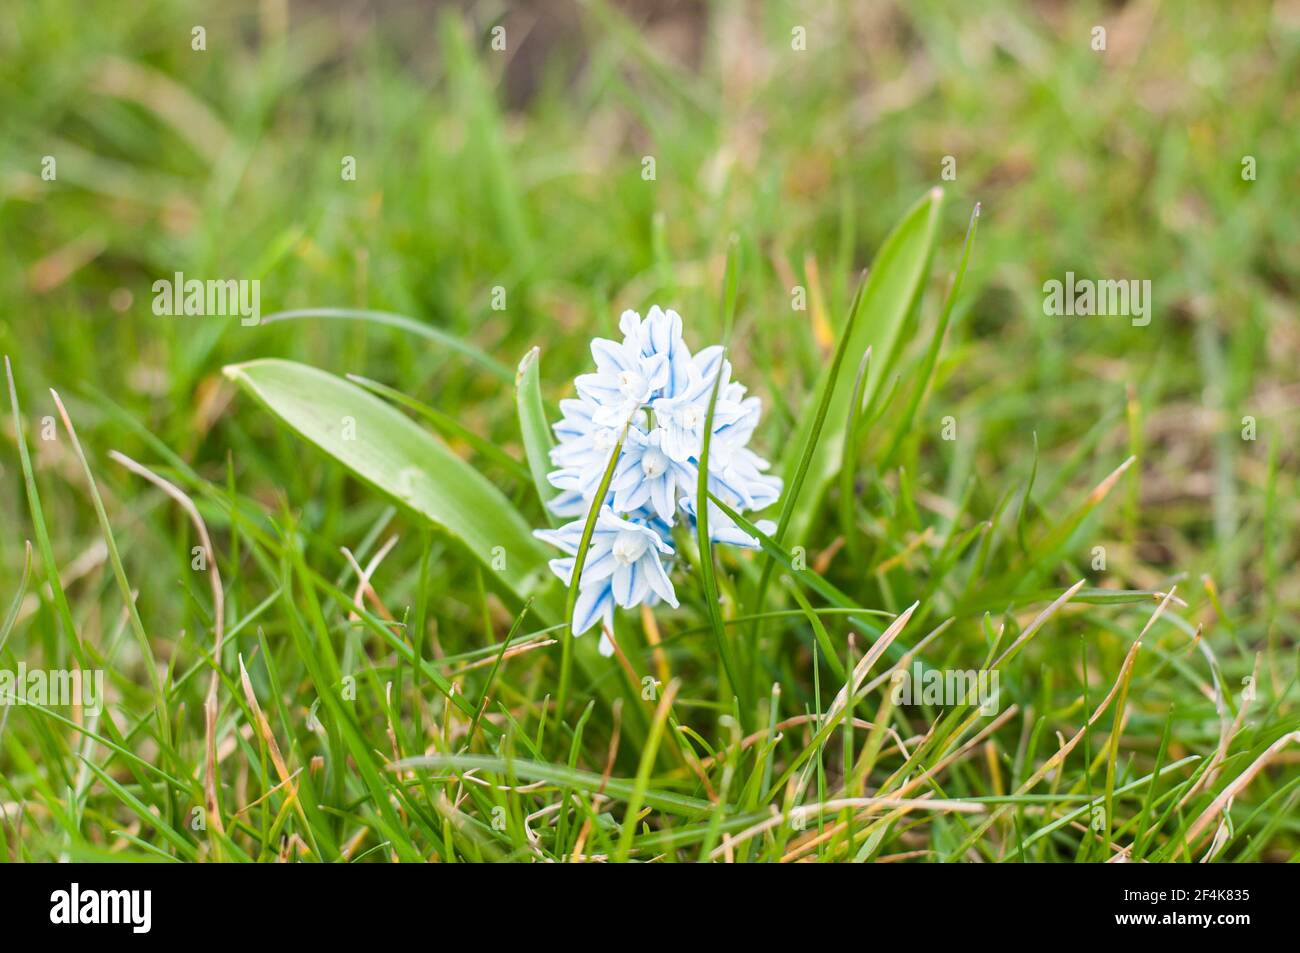 Blossoming spring flower - blue and white Hyacinths Stock Photo